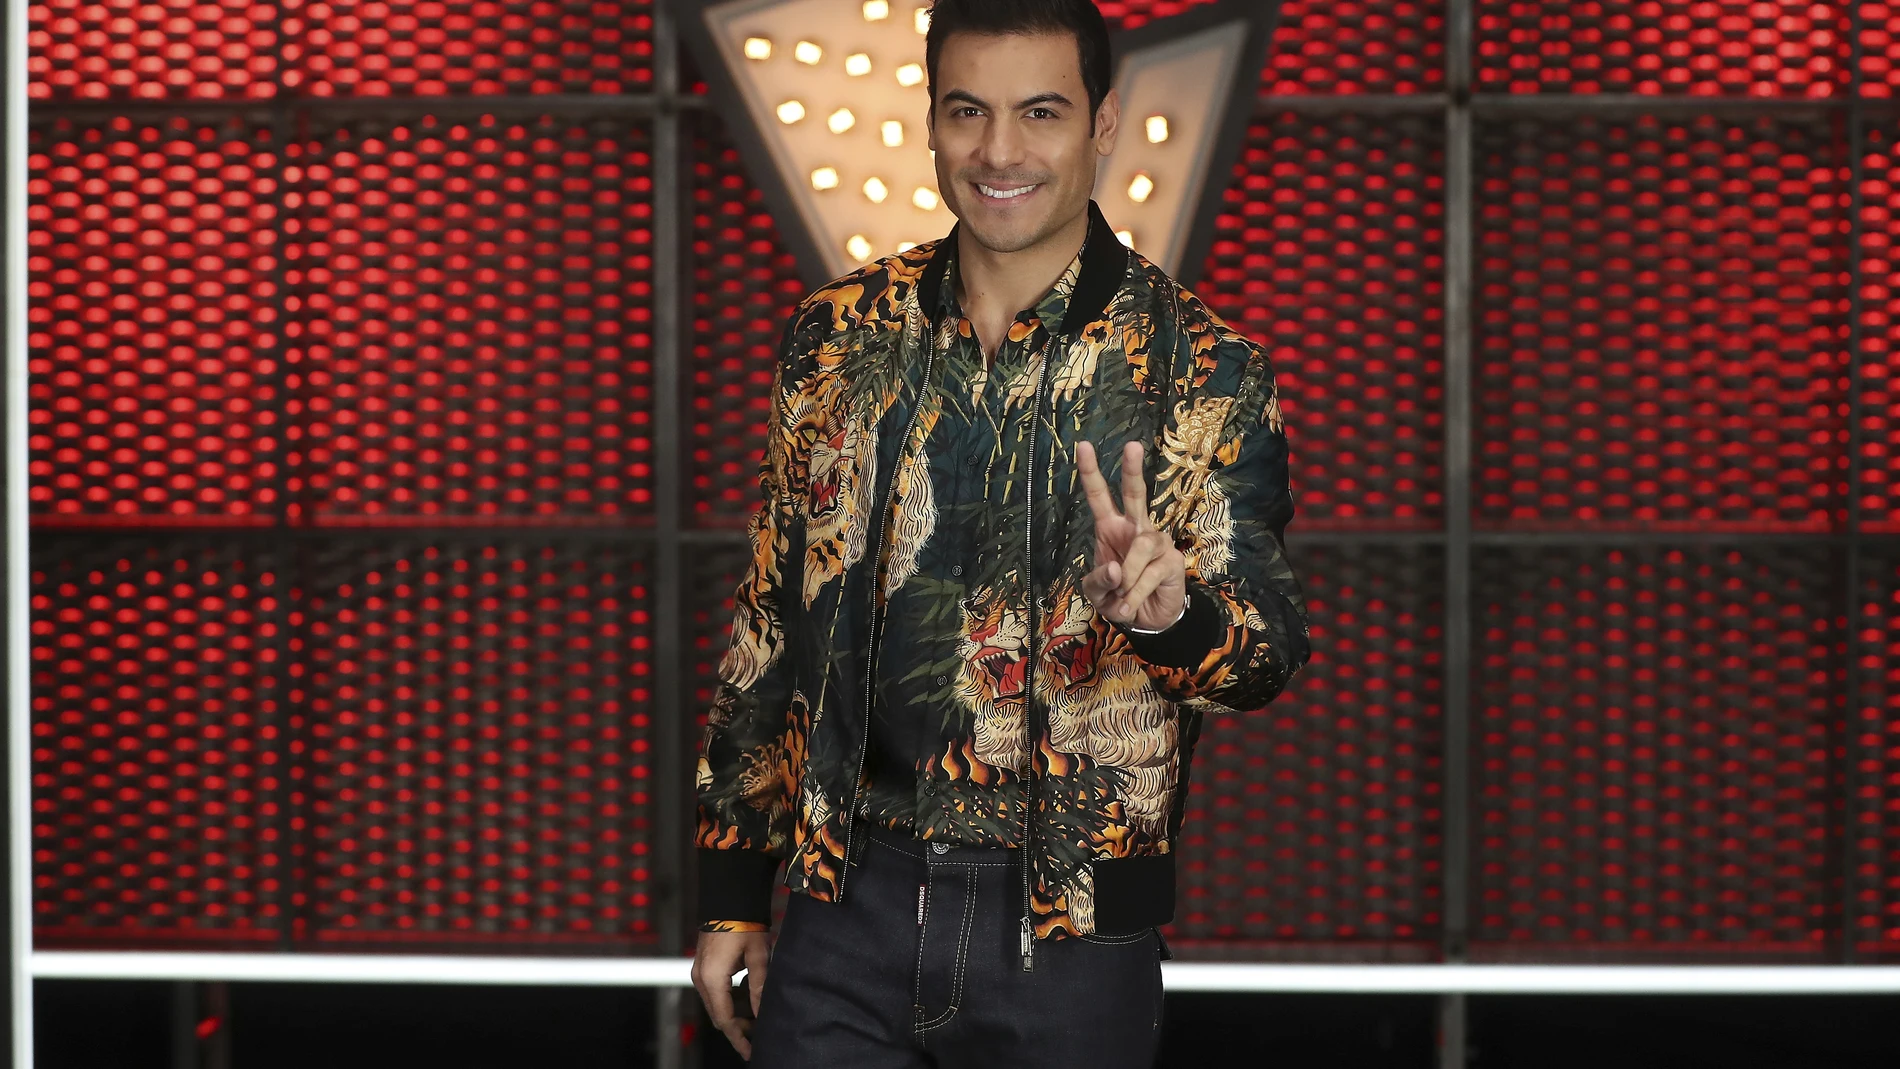 Singer Carlos Rivera at photocall for promotion tv show La Voz in Madrid.